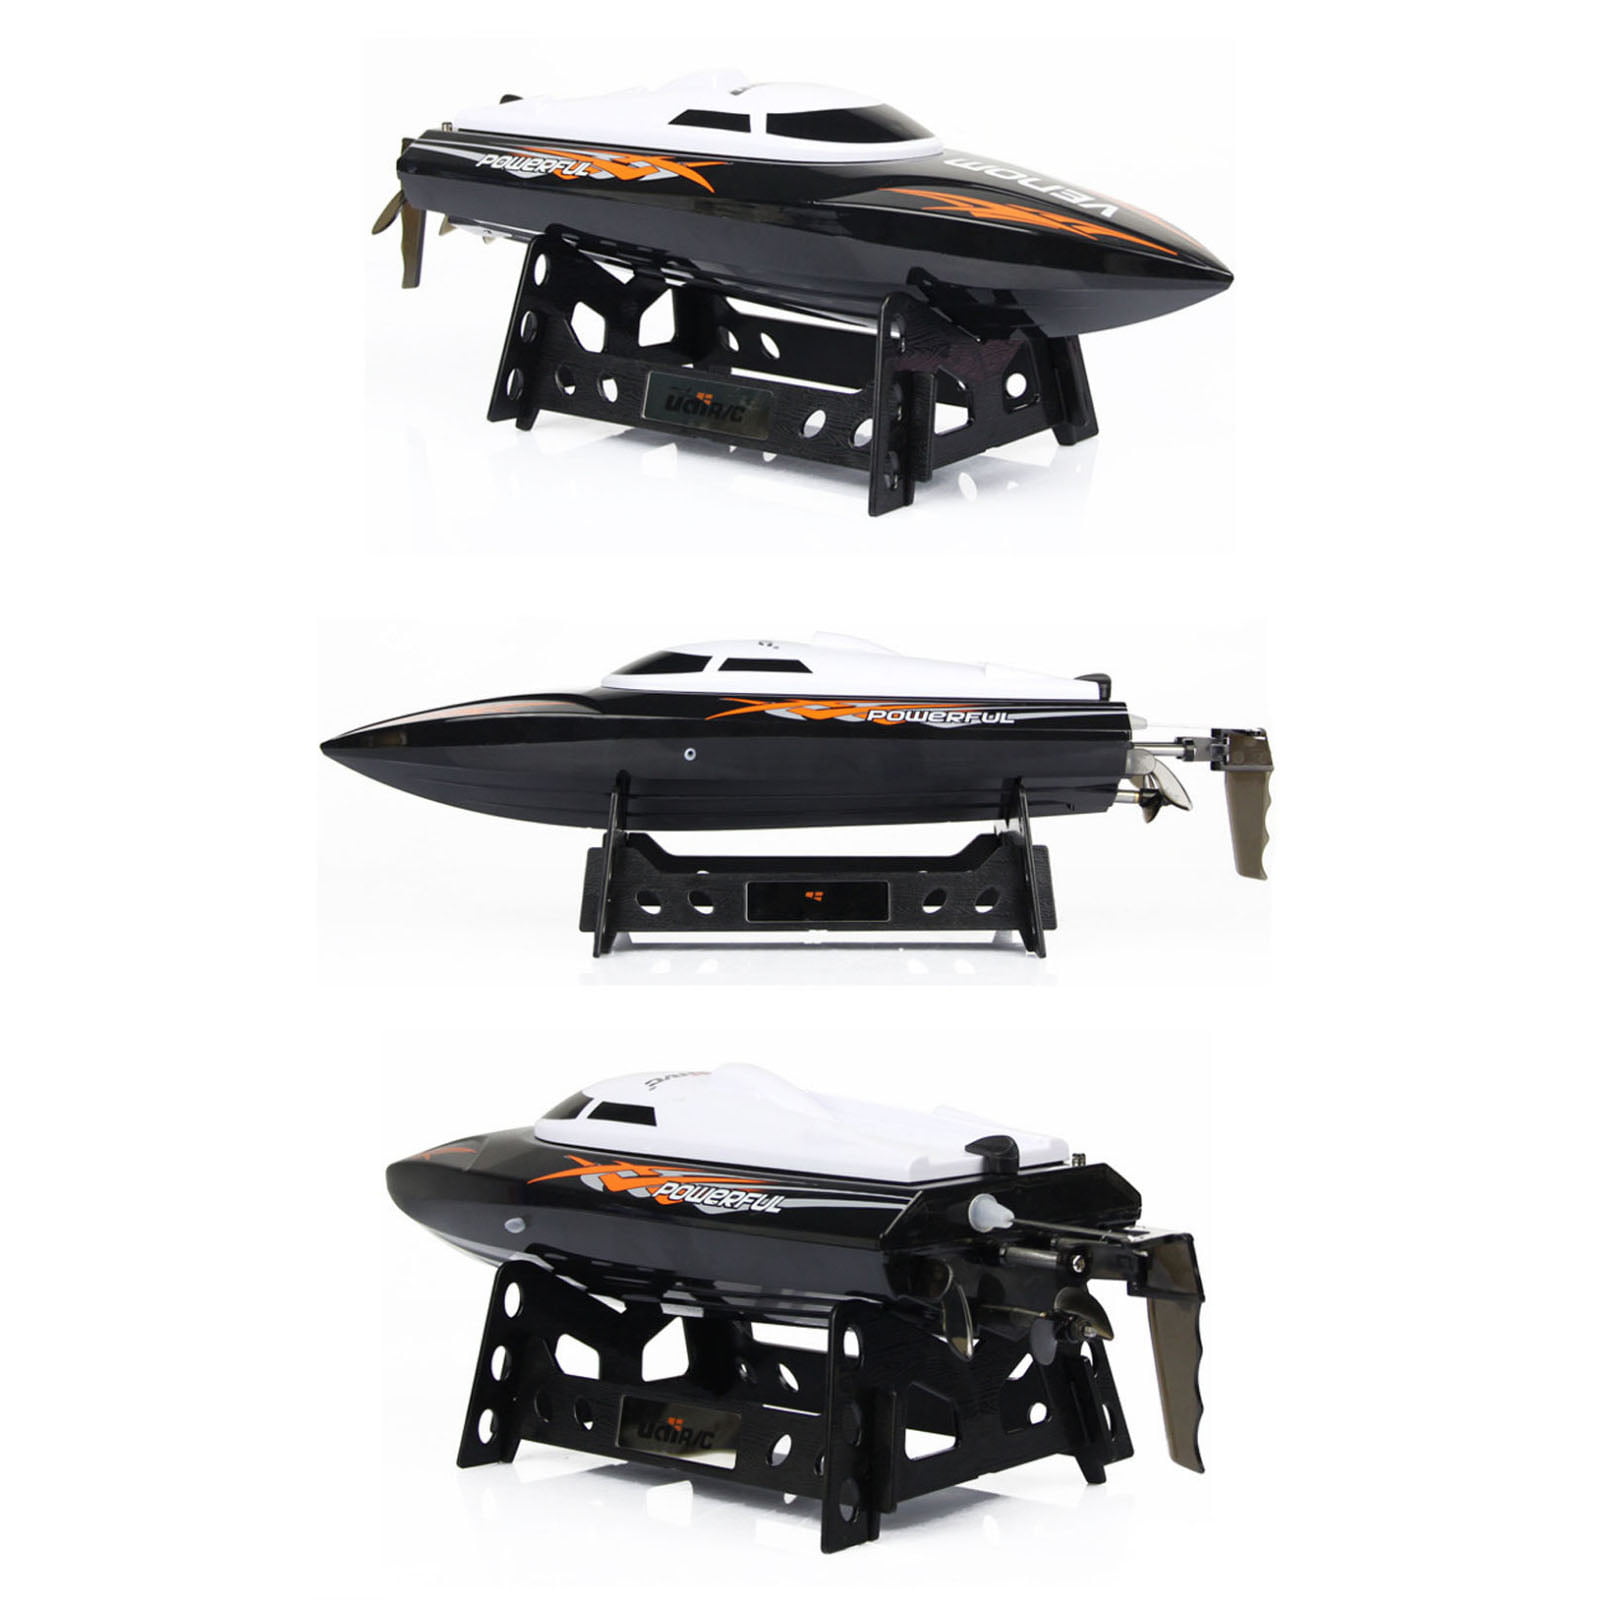 udirc 2.4 ghz high speed remote control electric boat